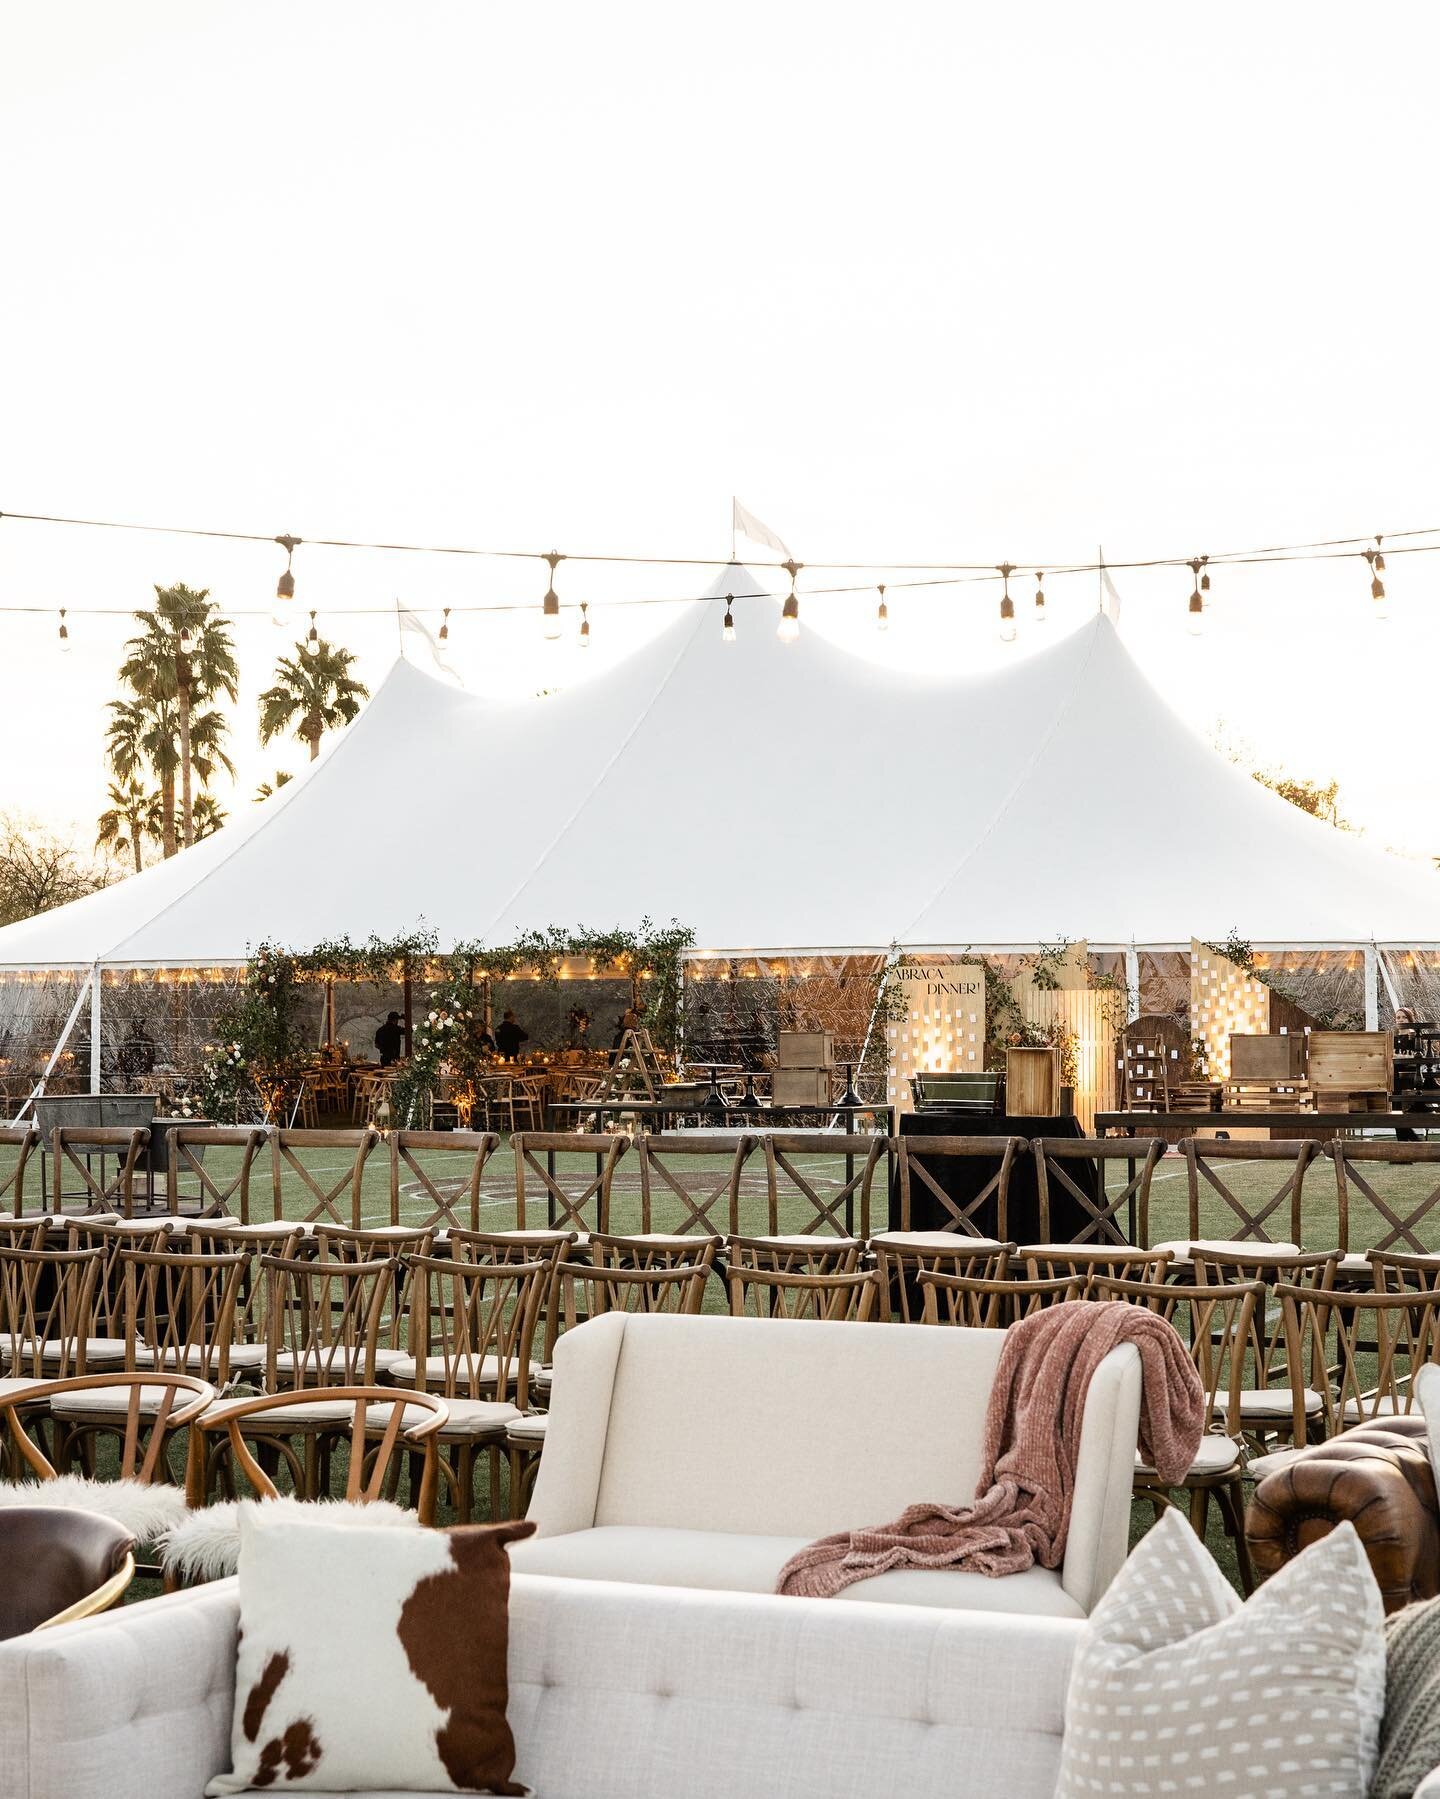 One of those days that have you pinching yourself! So grateful to have been a part of this beautiful event put on by @treasurehouseaz foundation, and designed and coordinated by the incredible @imoni_events! 

King Tent
Duchess Tent
String Lighting
O